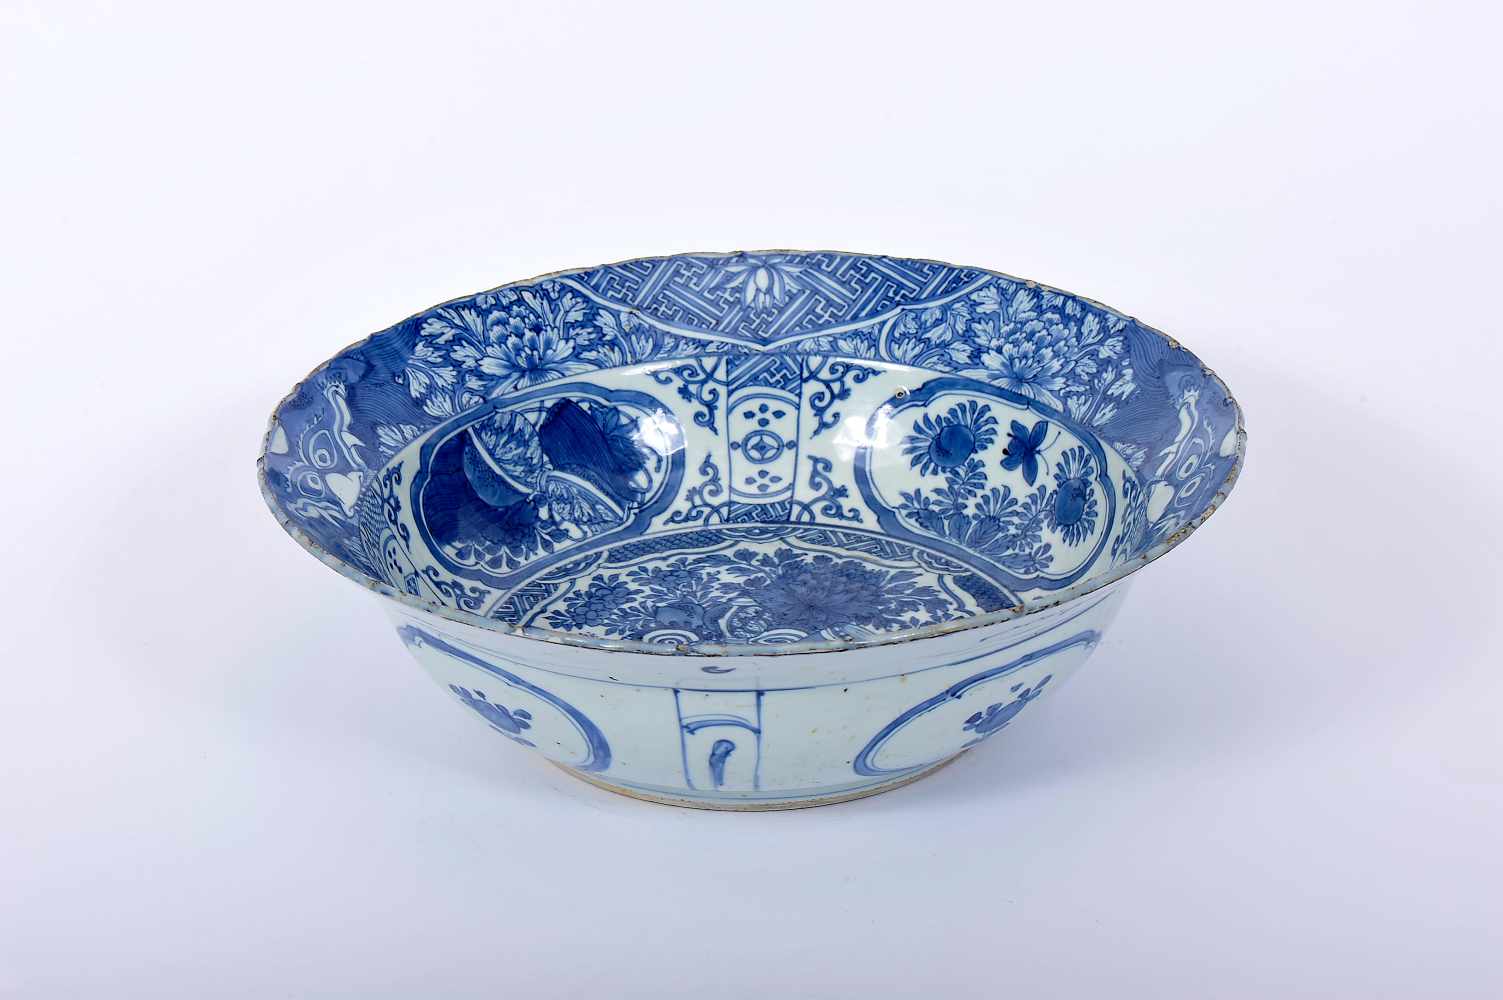 A Large Bowl, Chinese export Kraak porcelain, blue decoration "Bowl with flowers", boiler with